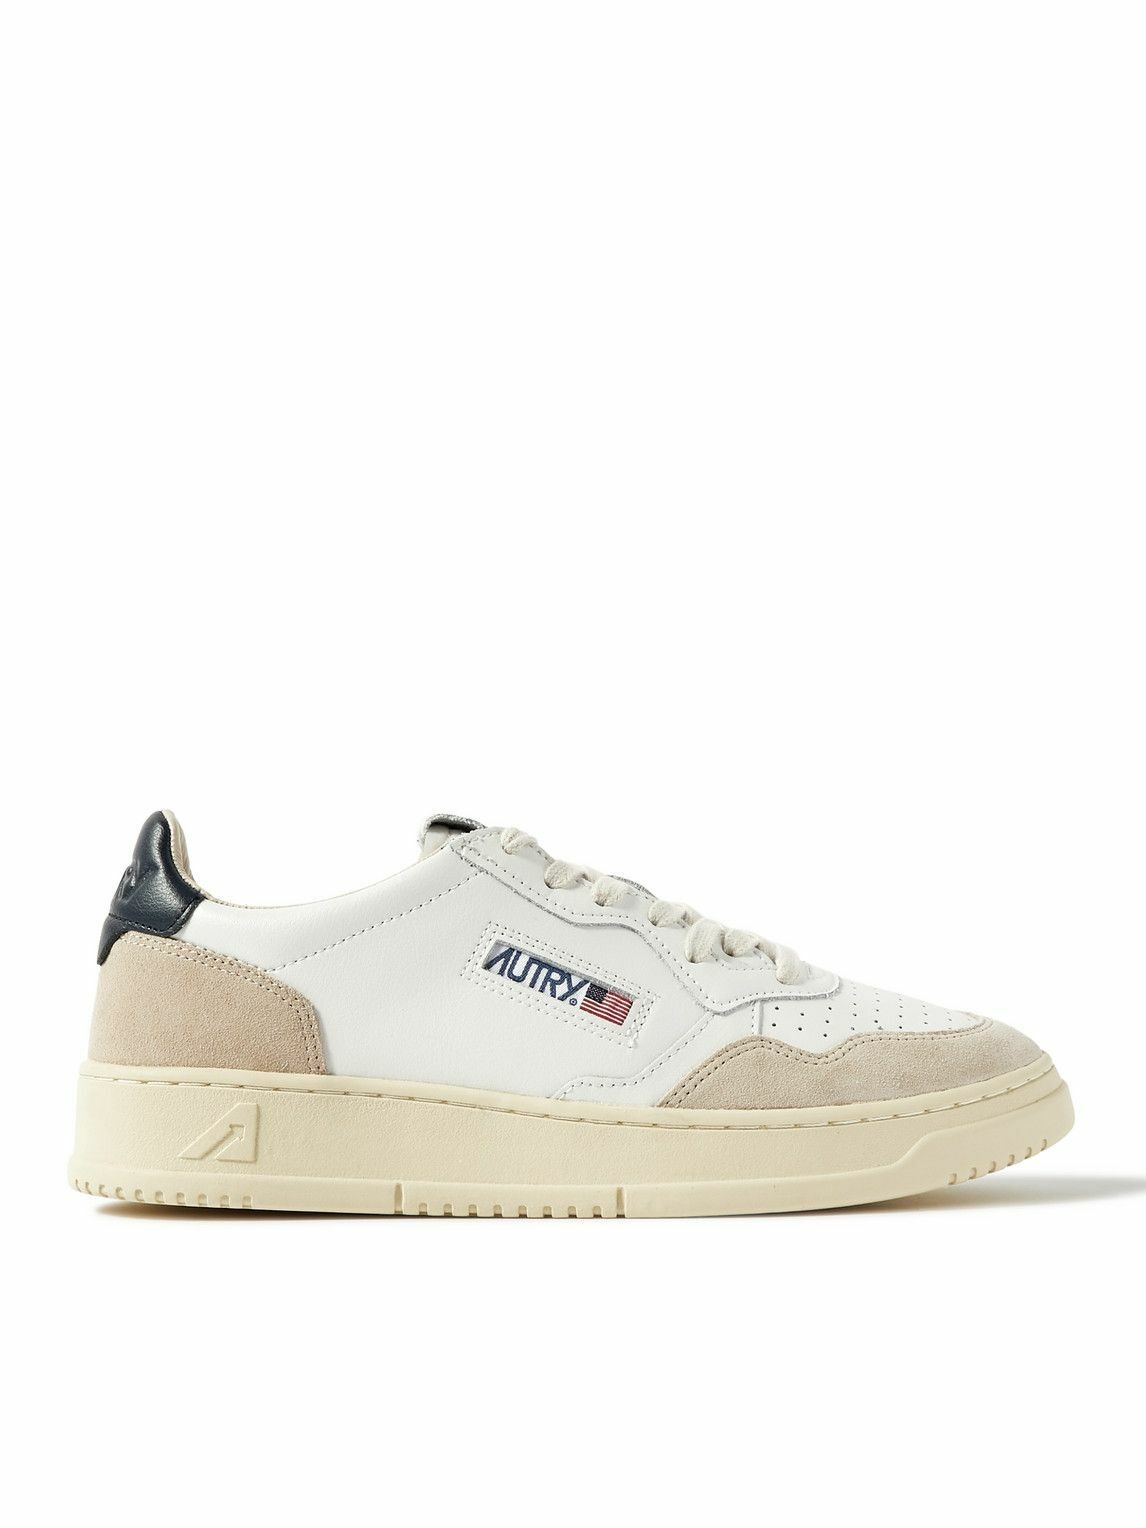 Autry - Medalist Suede-Trimmed Leather Sneakers - White Autry